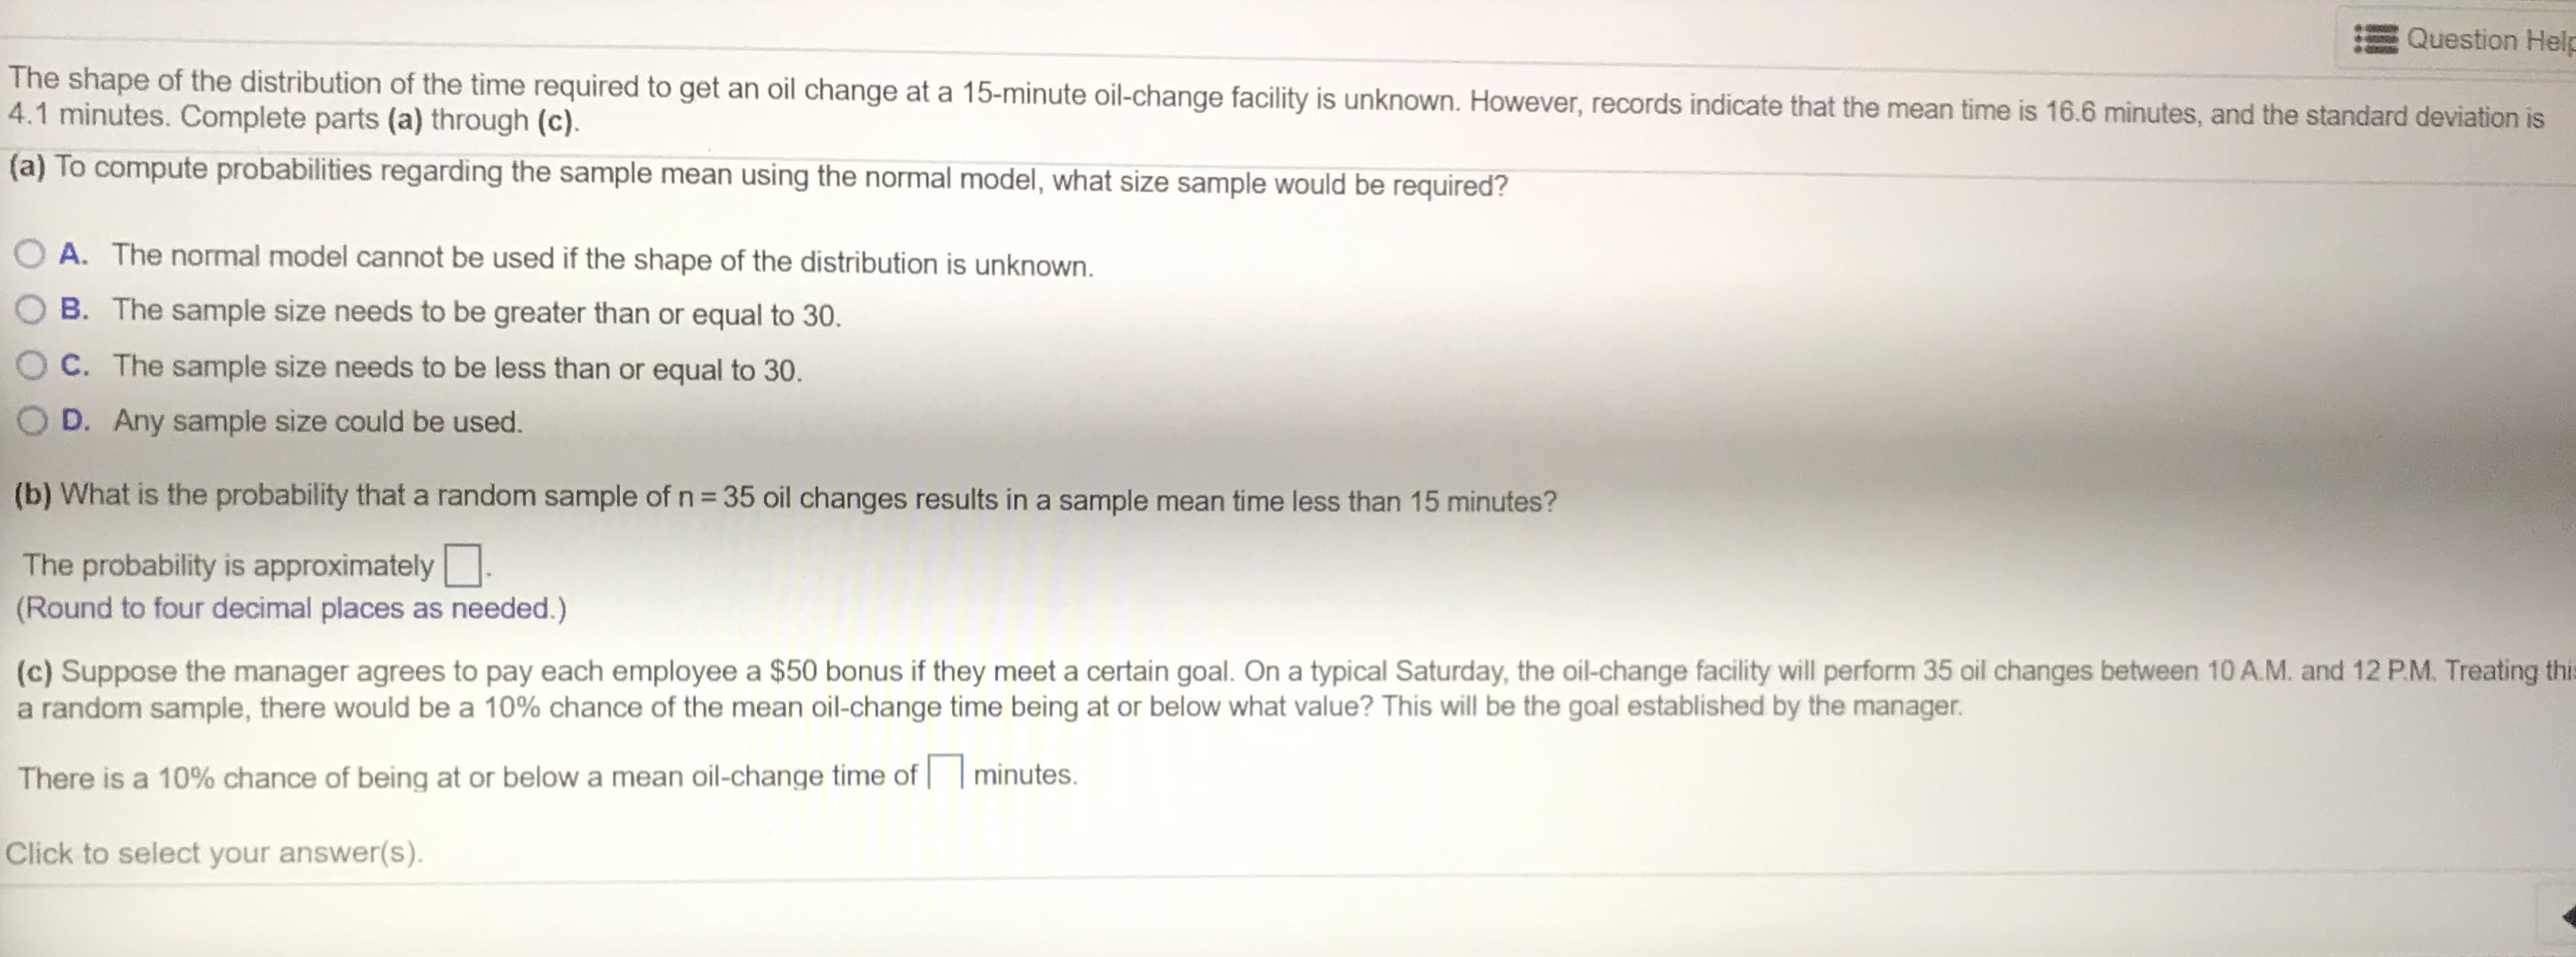 Question Held
The shape of the distribution of the time required to get an oil change at a 15-minute oil-change facility is unknown. However, records indicate that the mean time is 16.6 minutes, and the standard deviation is
4.1 minutes. Complete parts (a) through (c).
(a) To compute probabilities regarding the sample mean using the normal model, what size sample would be required?
A. The normal model cannot be used if the shape of the distribution is unknown.
B. The sample size needs to be greater than or equal to 30.
O C. The sample size needs to be less than or equal to 30.
D. Any sample size could be used.
(b) What is the probability that a random sample of n = 35 oil changes results in a sample mean time less than 15 minutes?
The probability is approximately.
(Round to four decimal places as needed.)
(c) Suppose the manager agrees to pay each employee a $50 bonus if they meet a certain goal. On a typical Saturday, the oil-change facility will perform 35 oil changes between 10 A.M. and 12 P.M. Treating thi
a random sample, there would be a 10% chance of the mean oil-change time being at or below what value? This will be the goal established by the manager.
There is a 10% chance of being at or below a mean oil-change time of | | minutes.
Click to select your answer(s).
